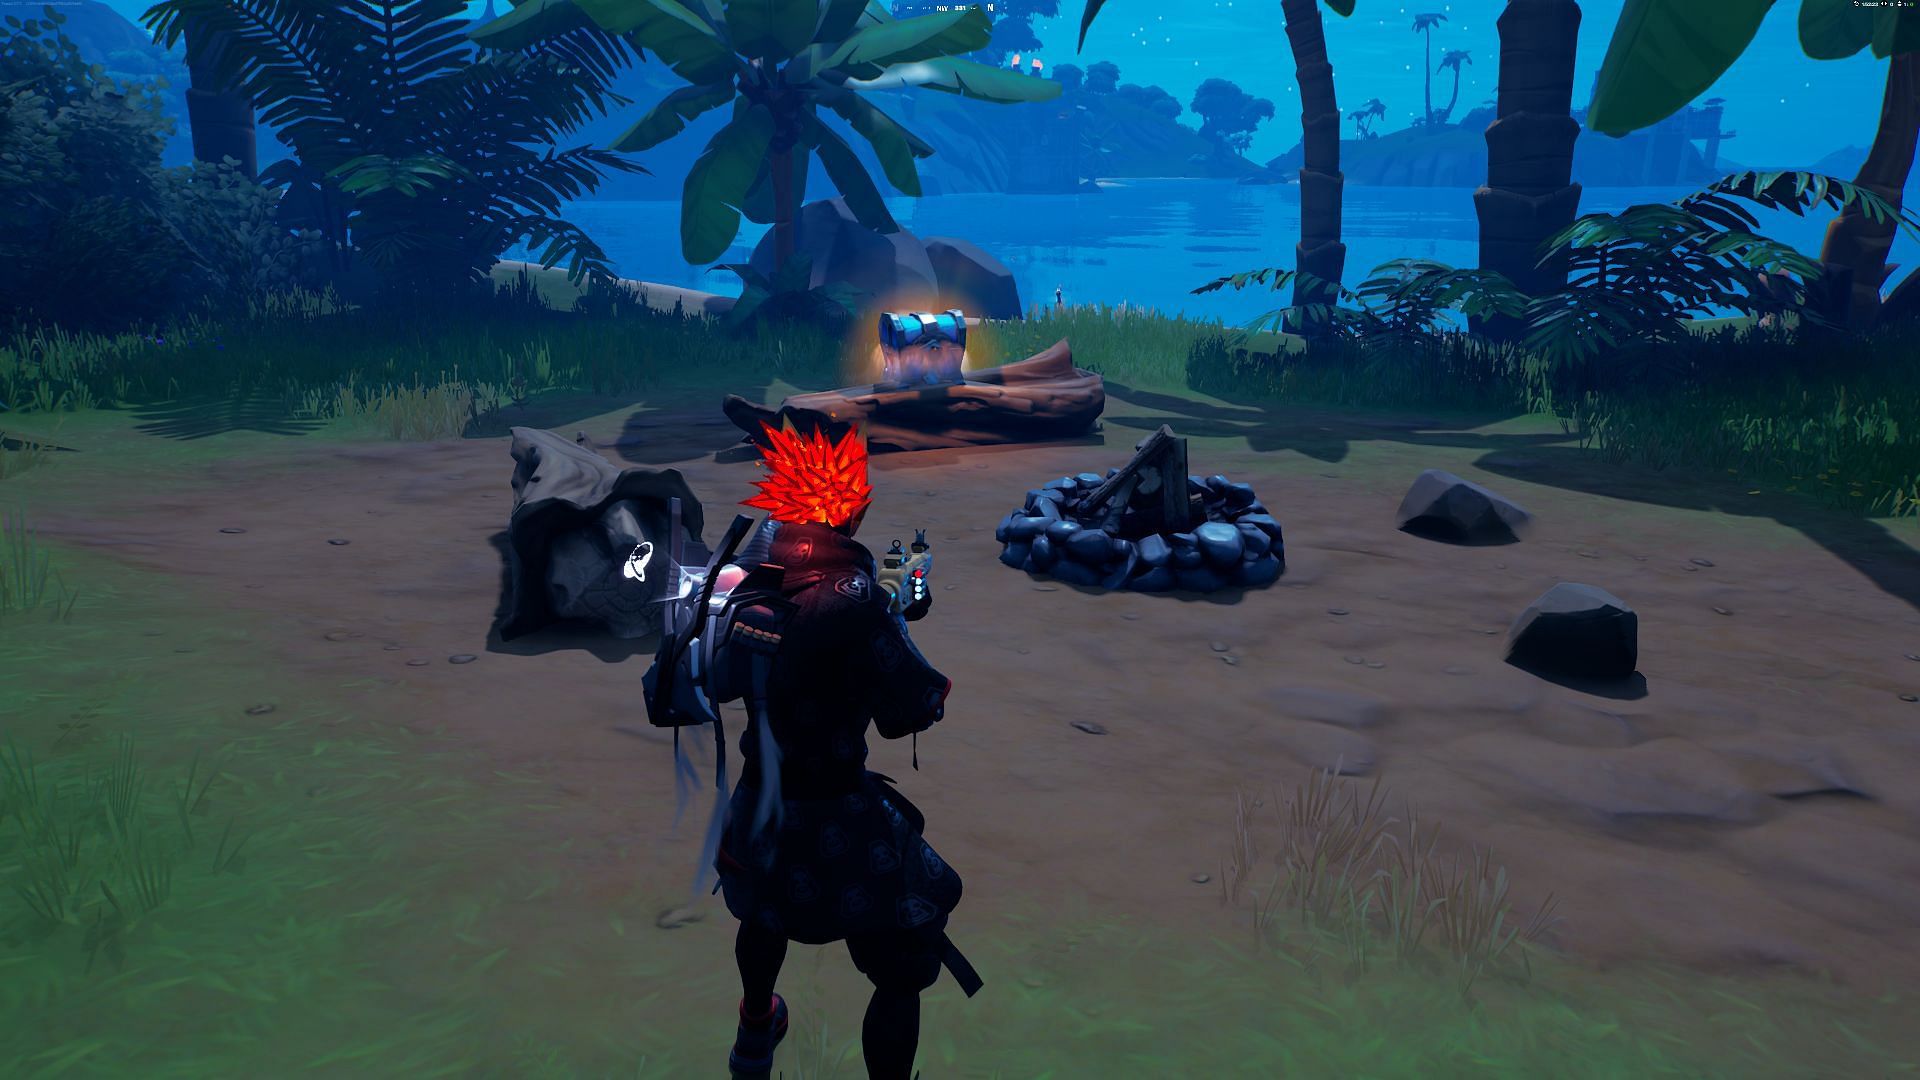 Rare chest next to a campfire? What are the odds! (Image via Epic Games/Fortnite)